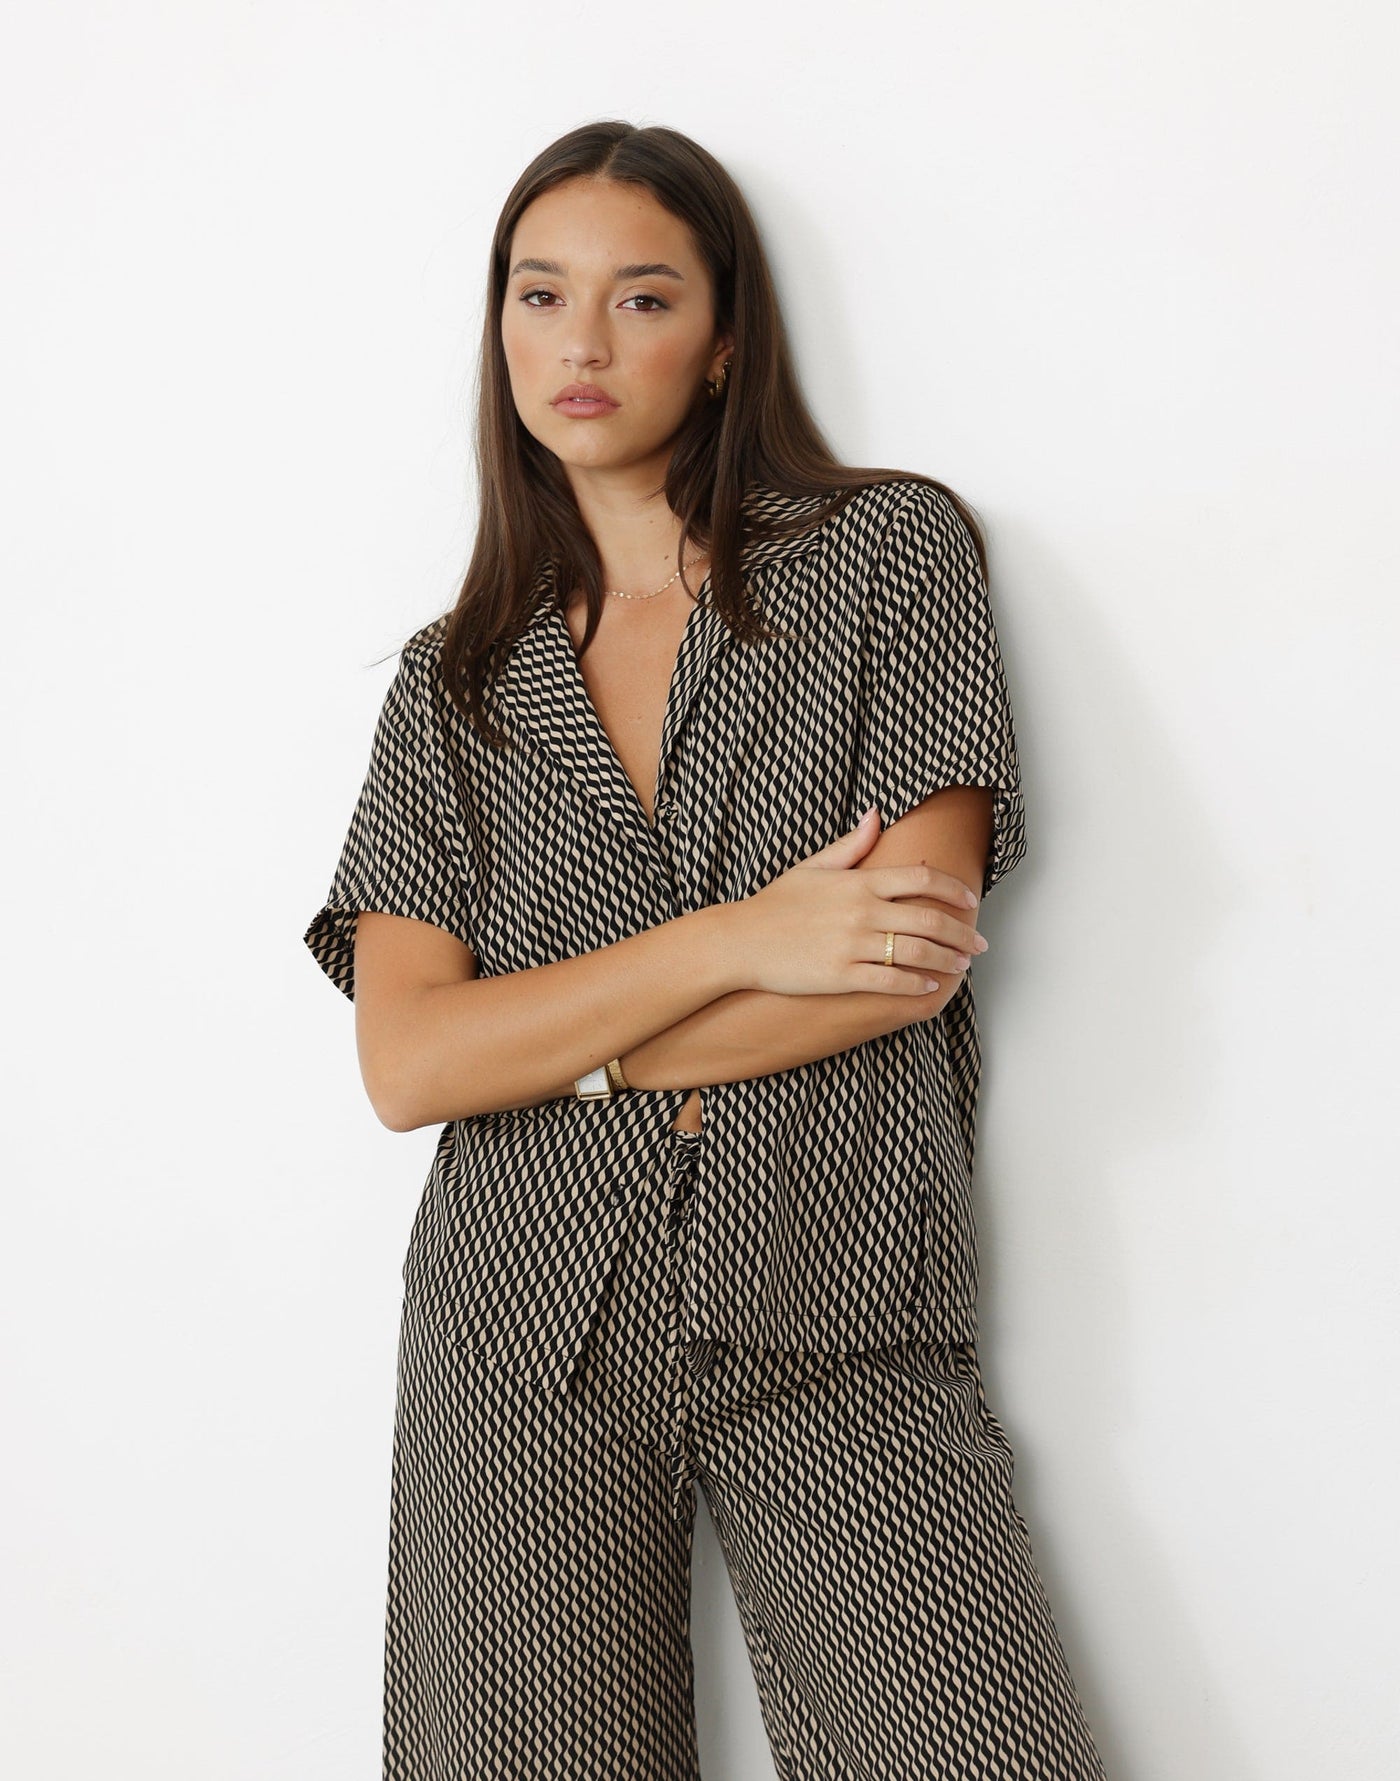 Zaya Shirt (Sand Ripple) | CHARCOAL Exclusive - Short Sleeved Patterned Button Closure Shirt - Women's Top - Charcoal Clothing